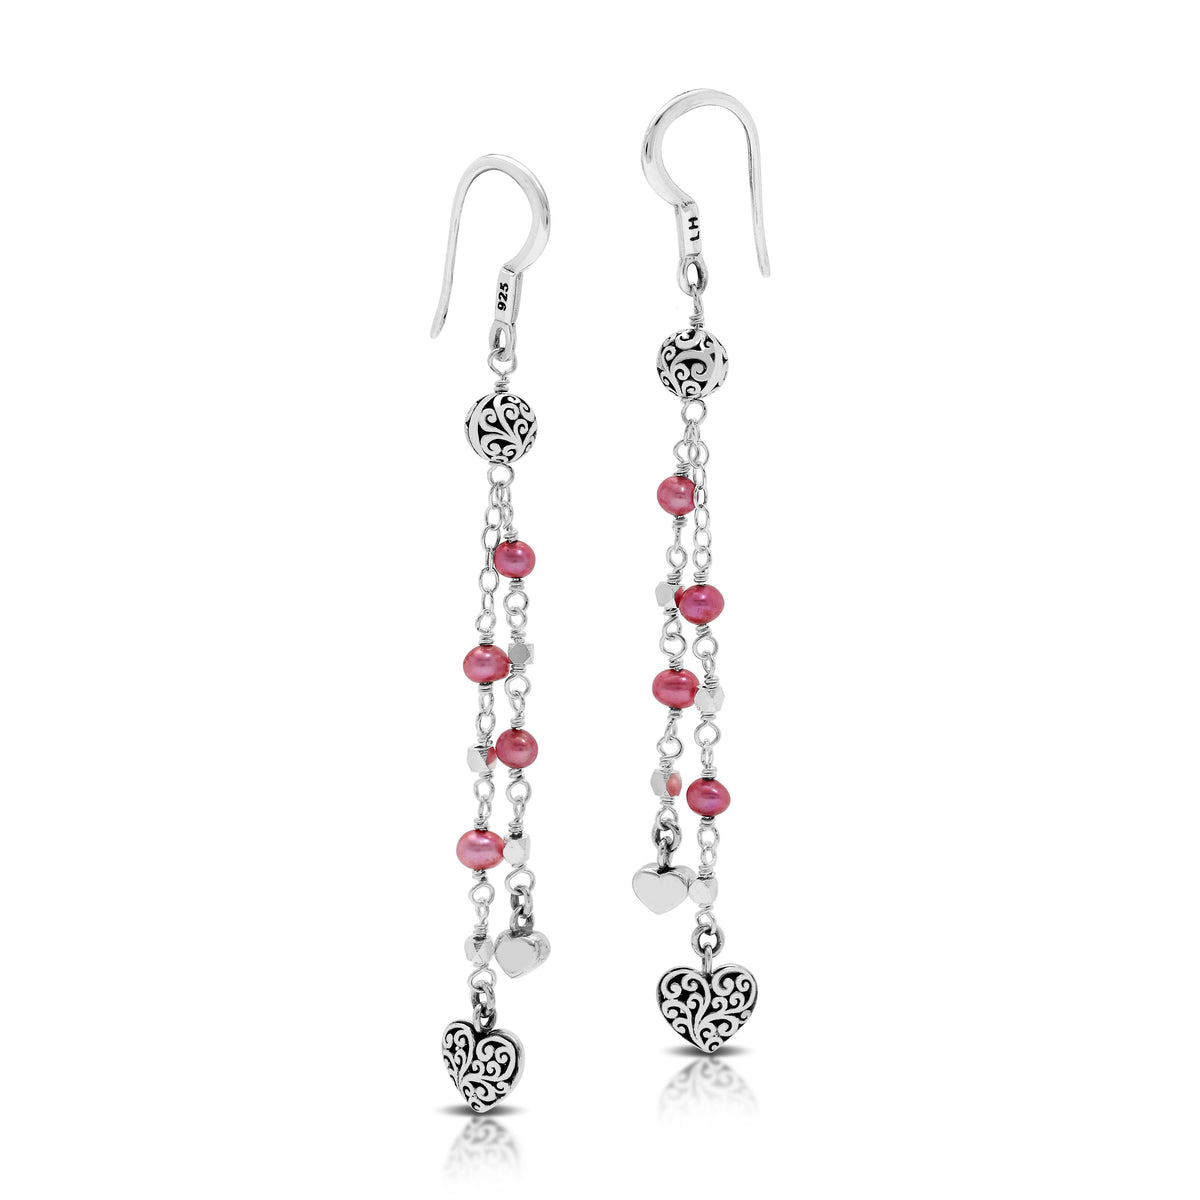 Pink Pearl Bead (4mm) with Signature Scroll Heart Charm Wire-Wrapped Drop Fishhook Earrings. 65mm Drop